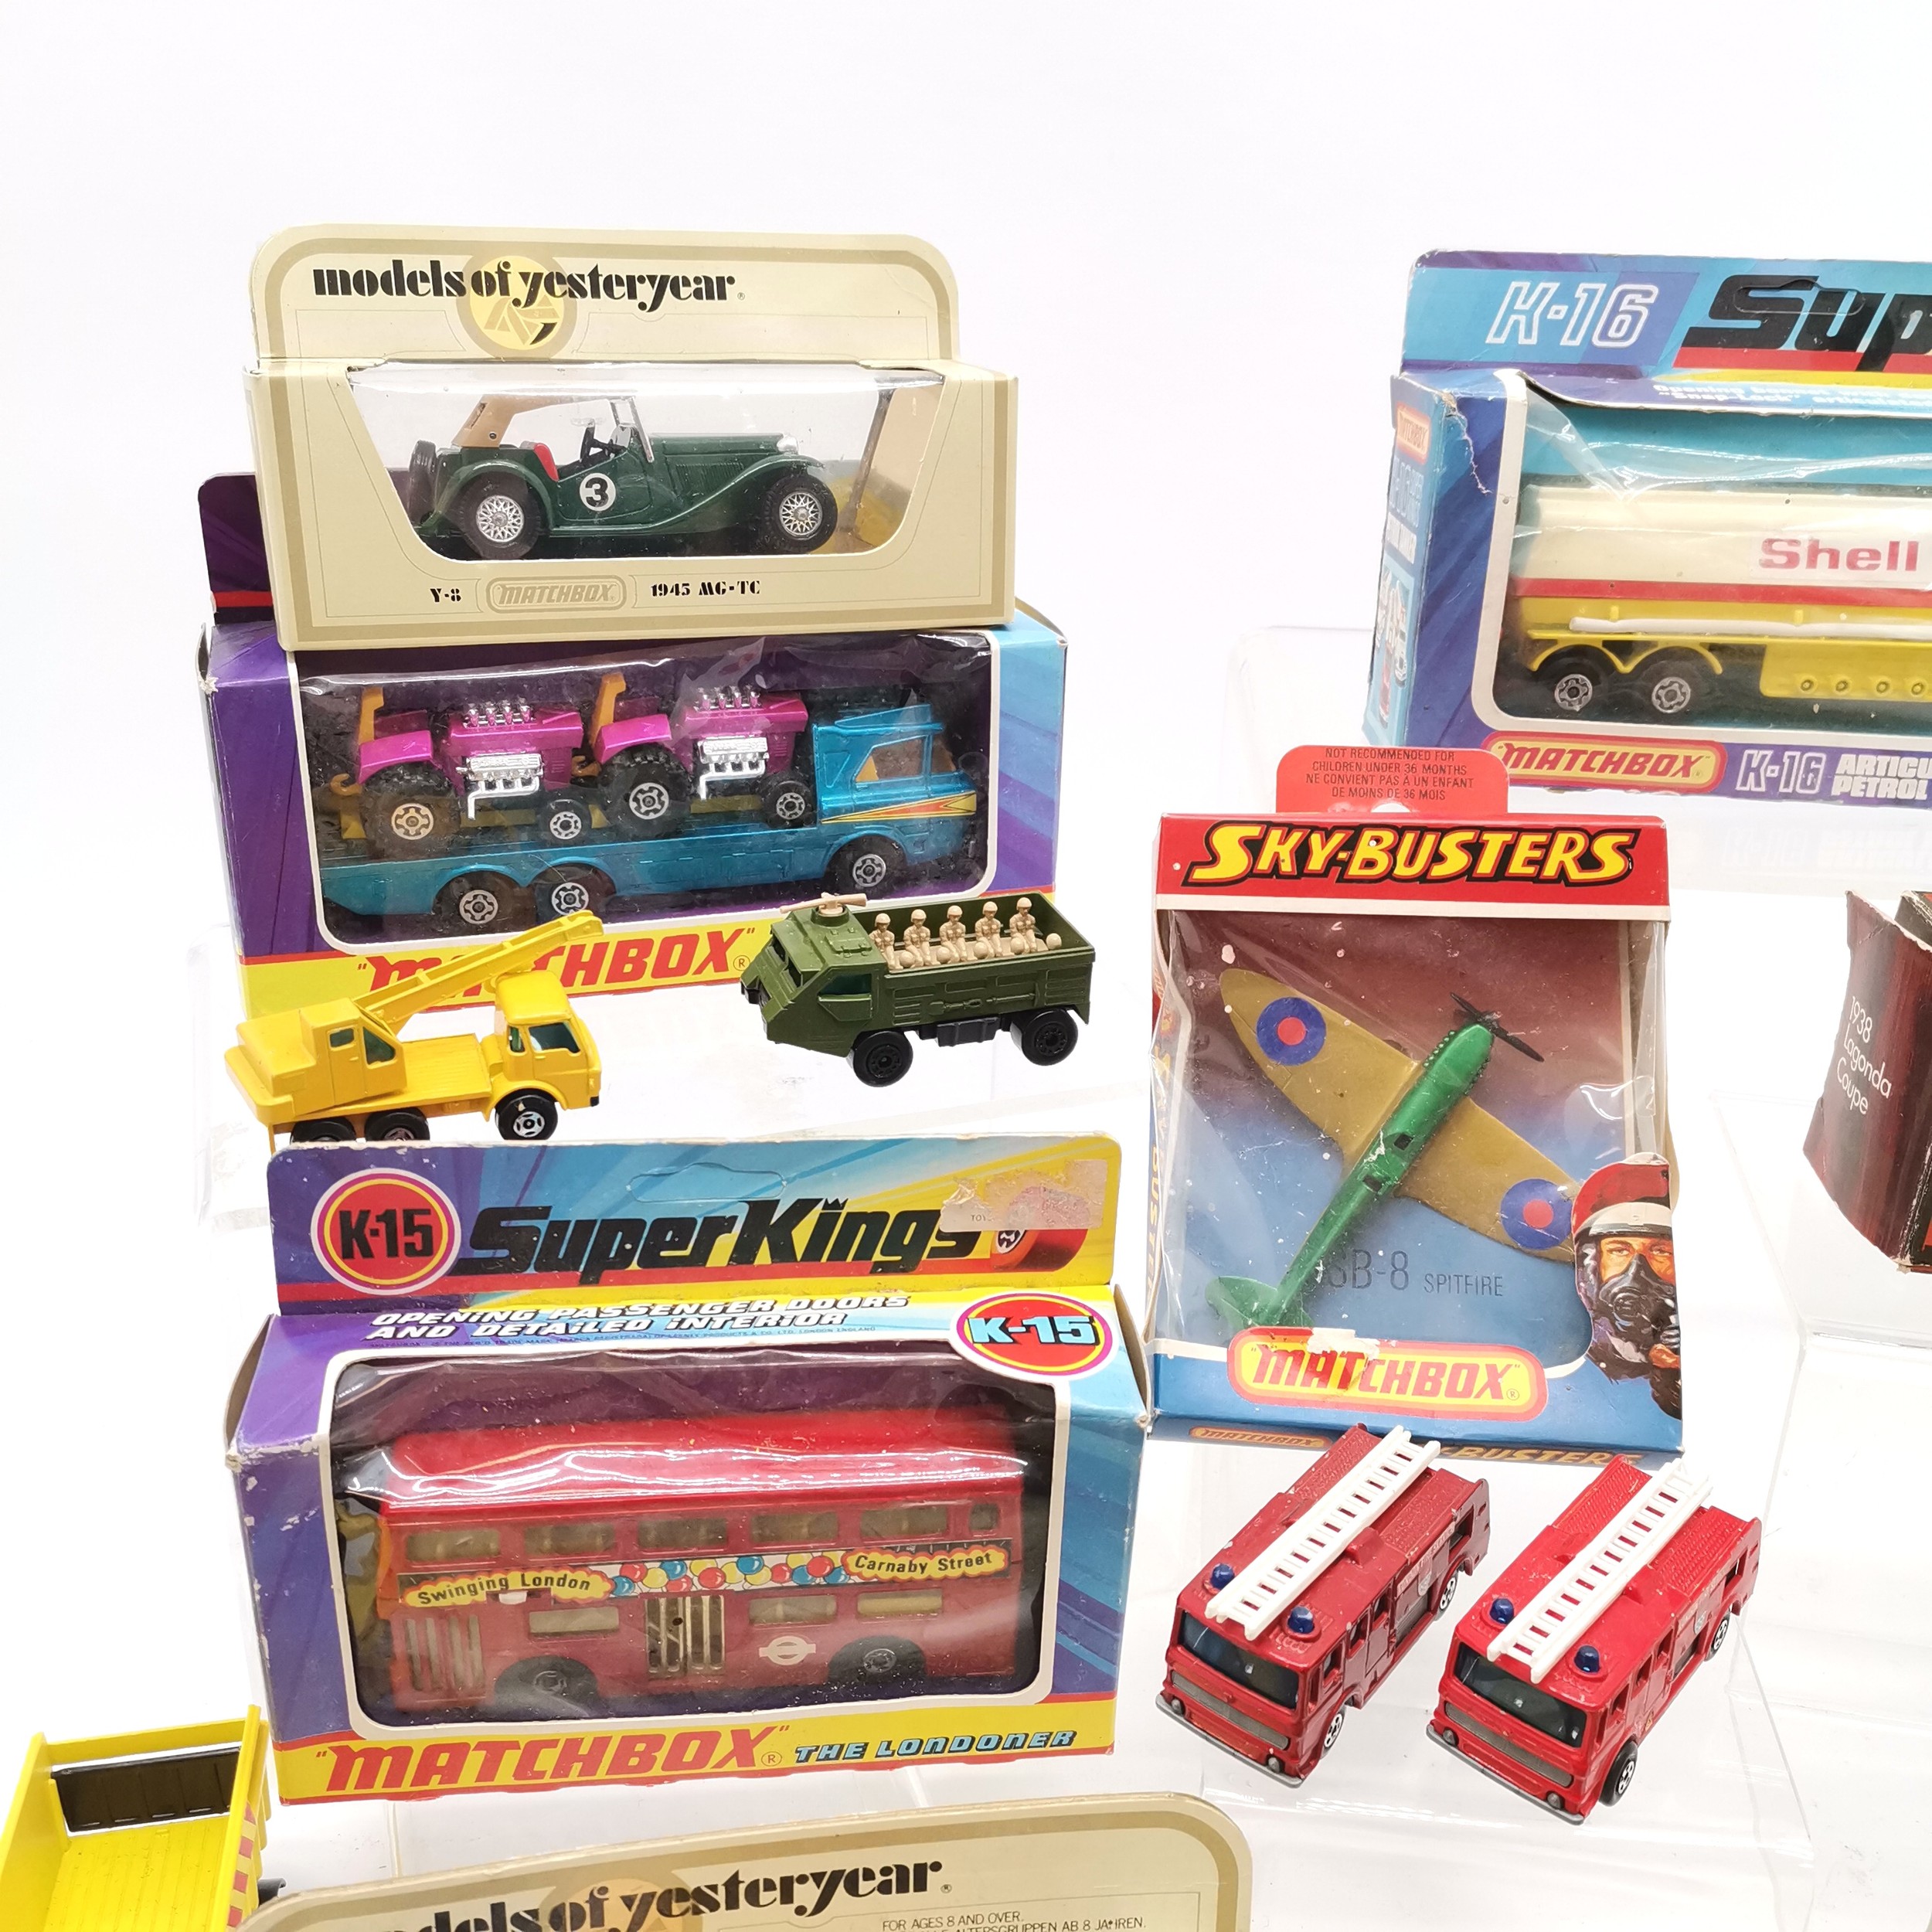 Collection of boxed and unboxed Matchbox toys including 4 models of yesteryear (X2 1912 Ford model - Image 2 of 5